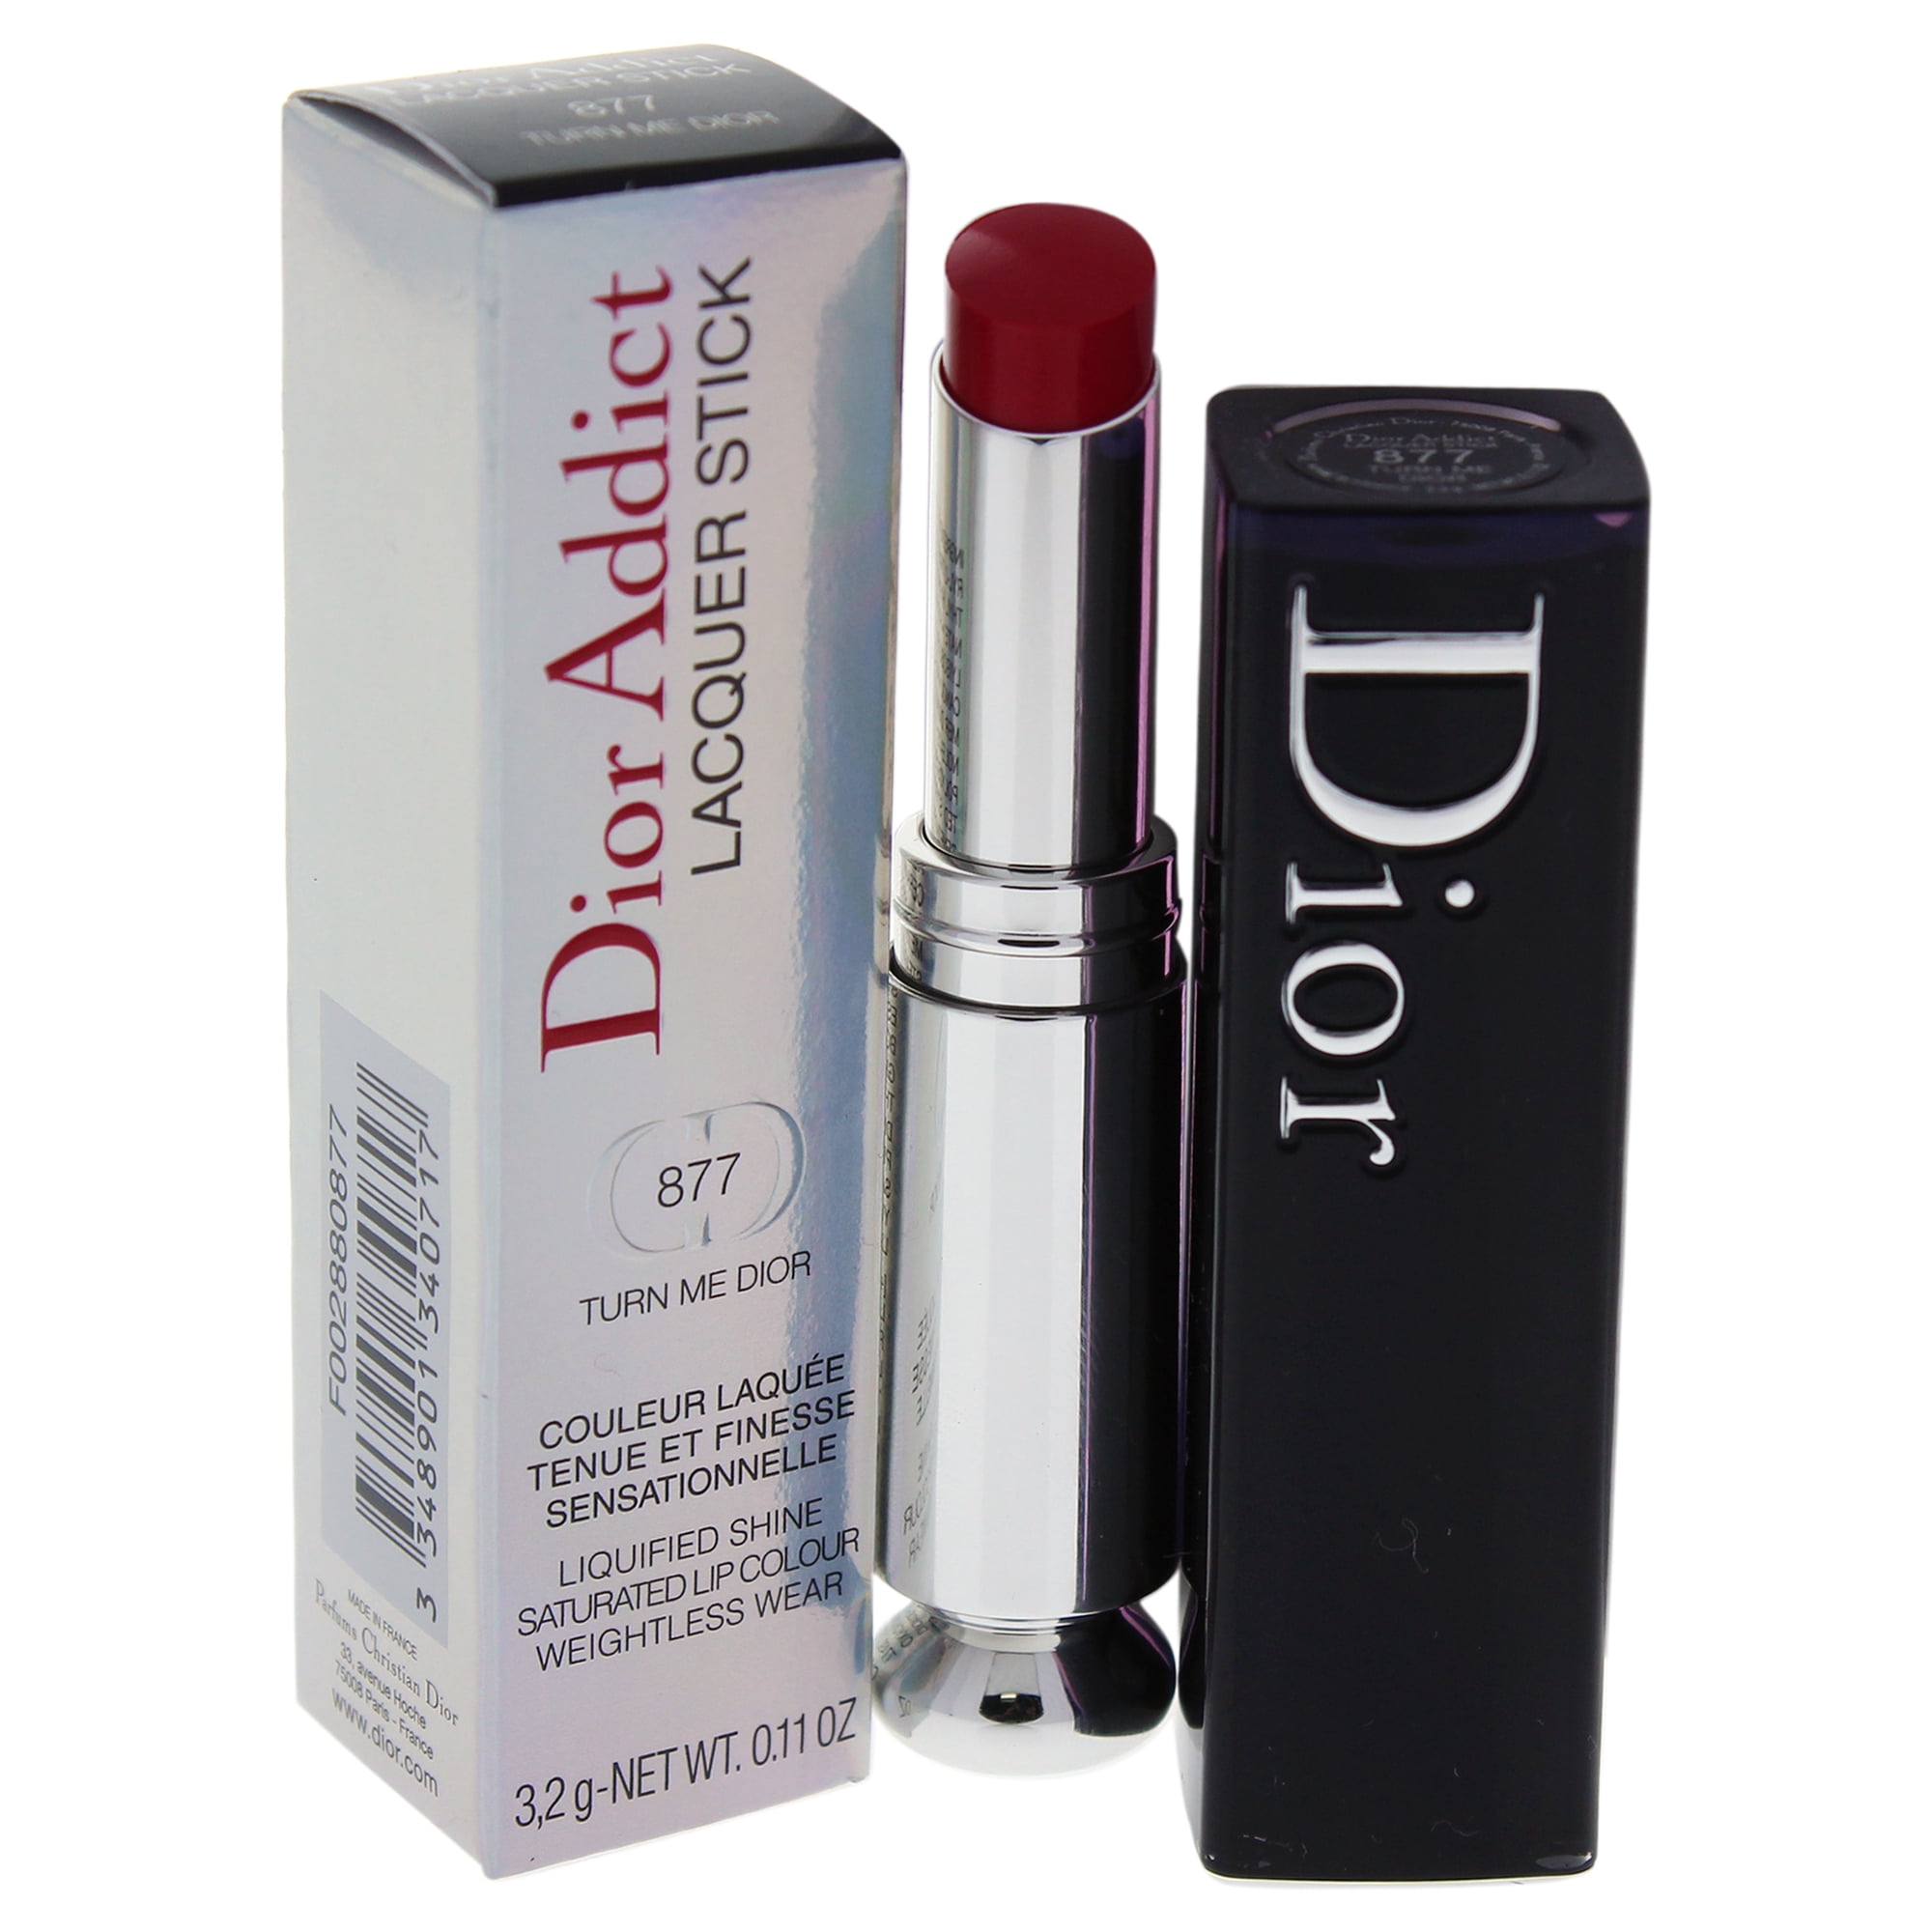 Lịch sử giá Son dưỡng Dior Addict Lacquer Stick 877 Ouibeaute cập nhật  62023  BeeCost